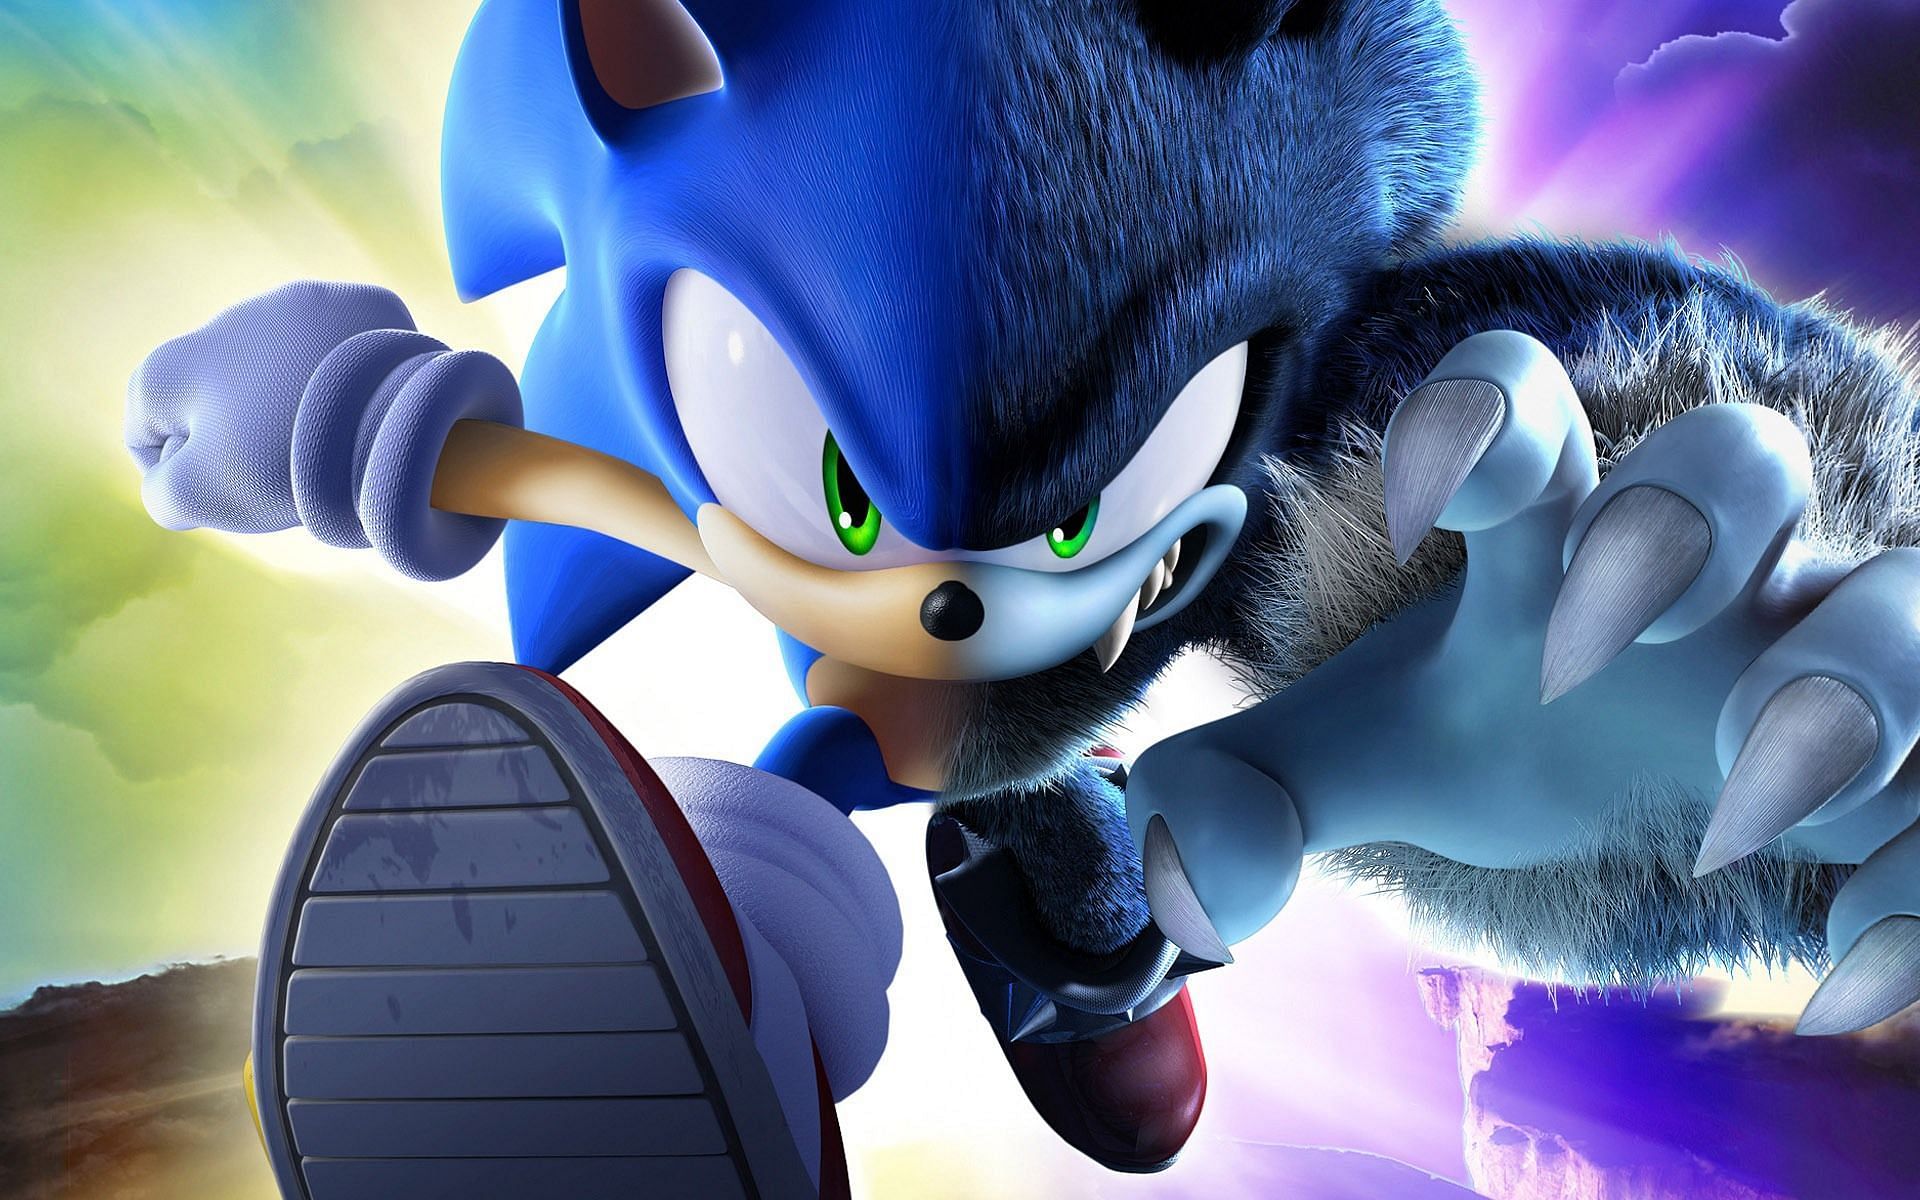 Sonic the Hedgehog, a fictional character by Naoto Ohshima (Image via Paramount Pictures)